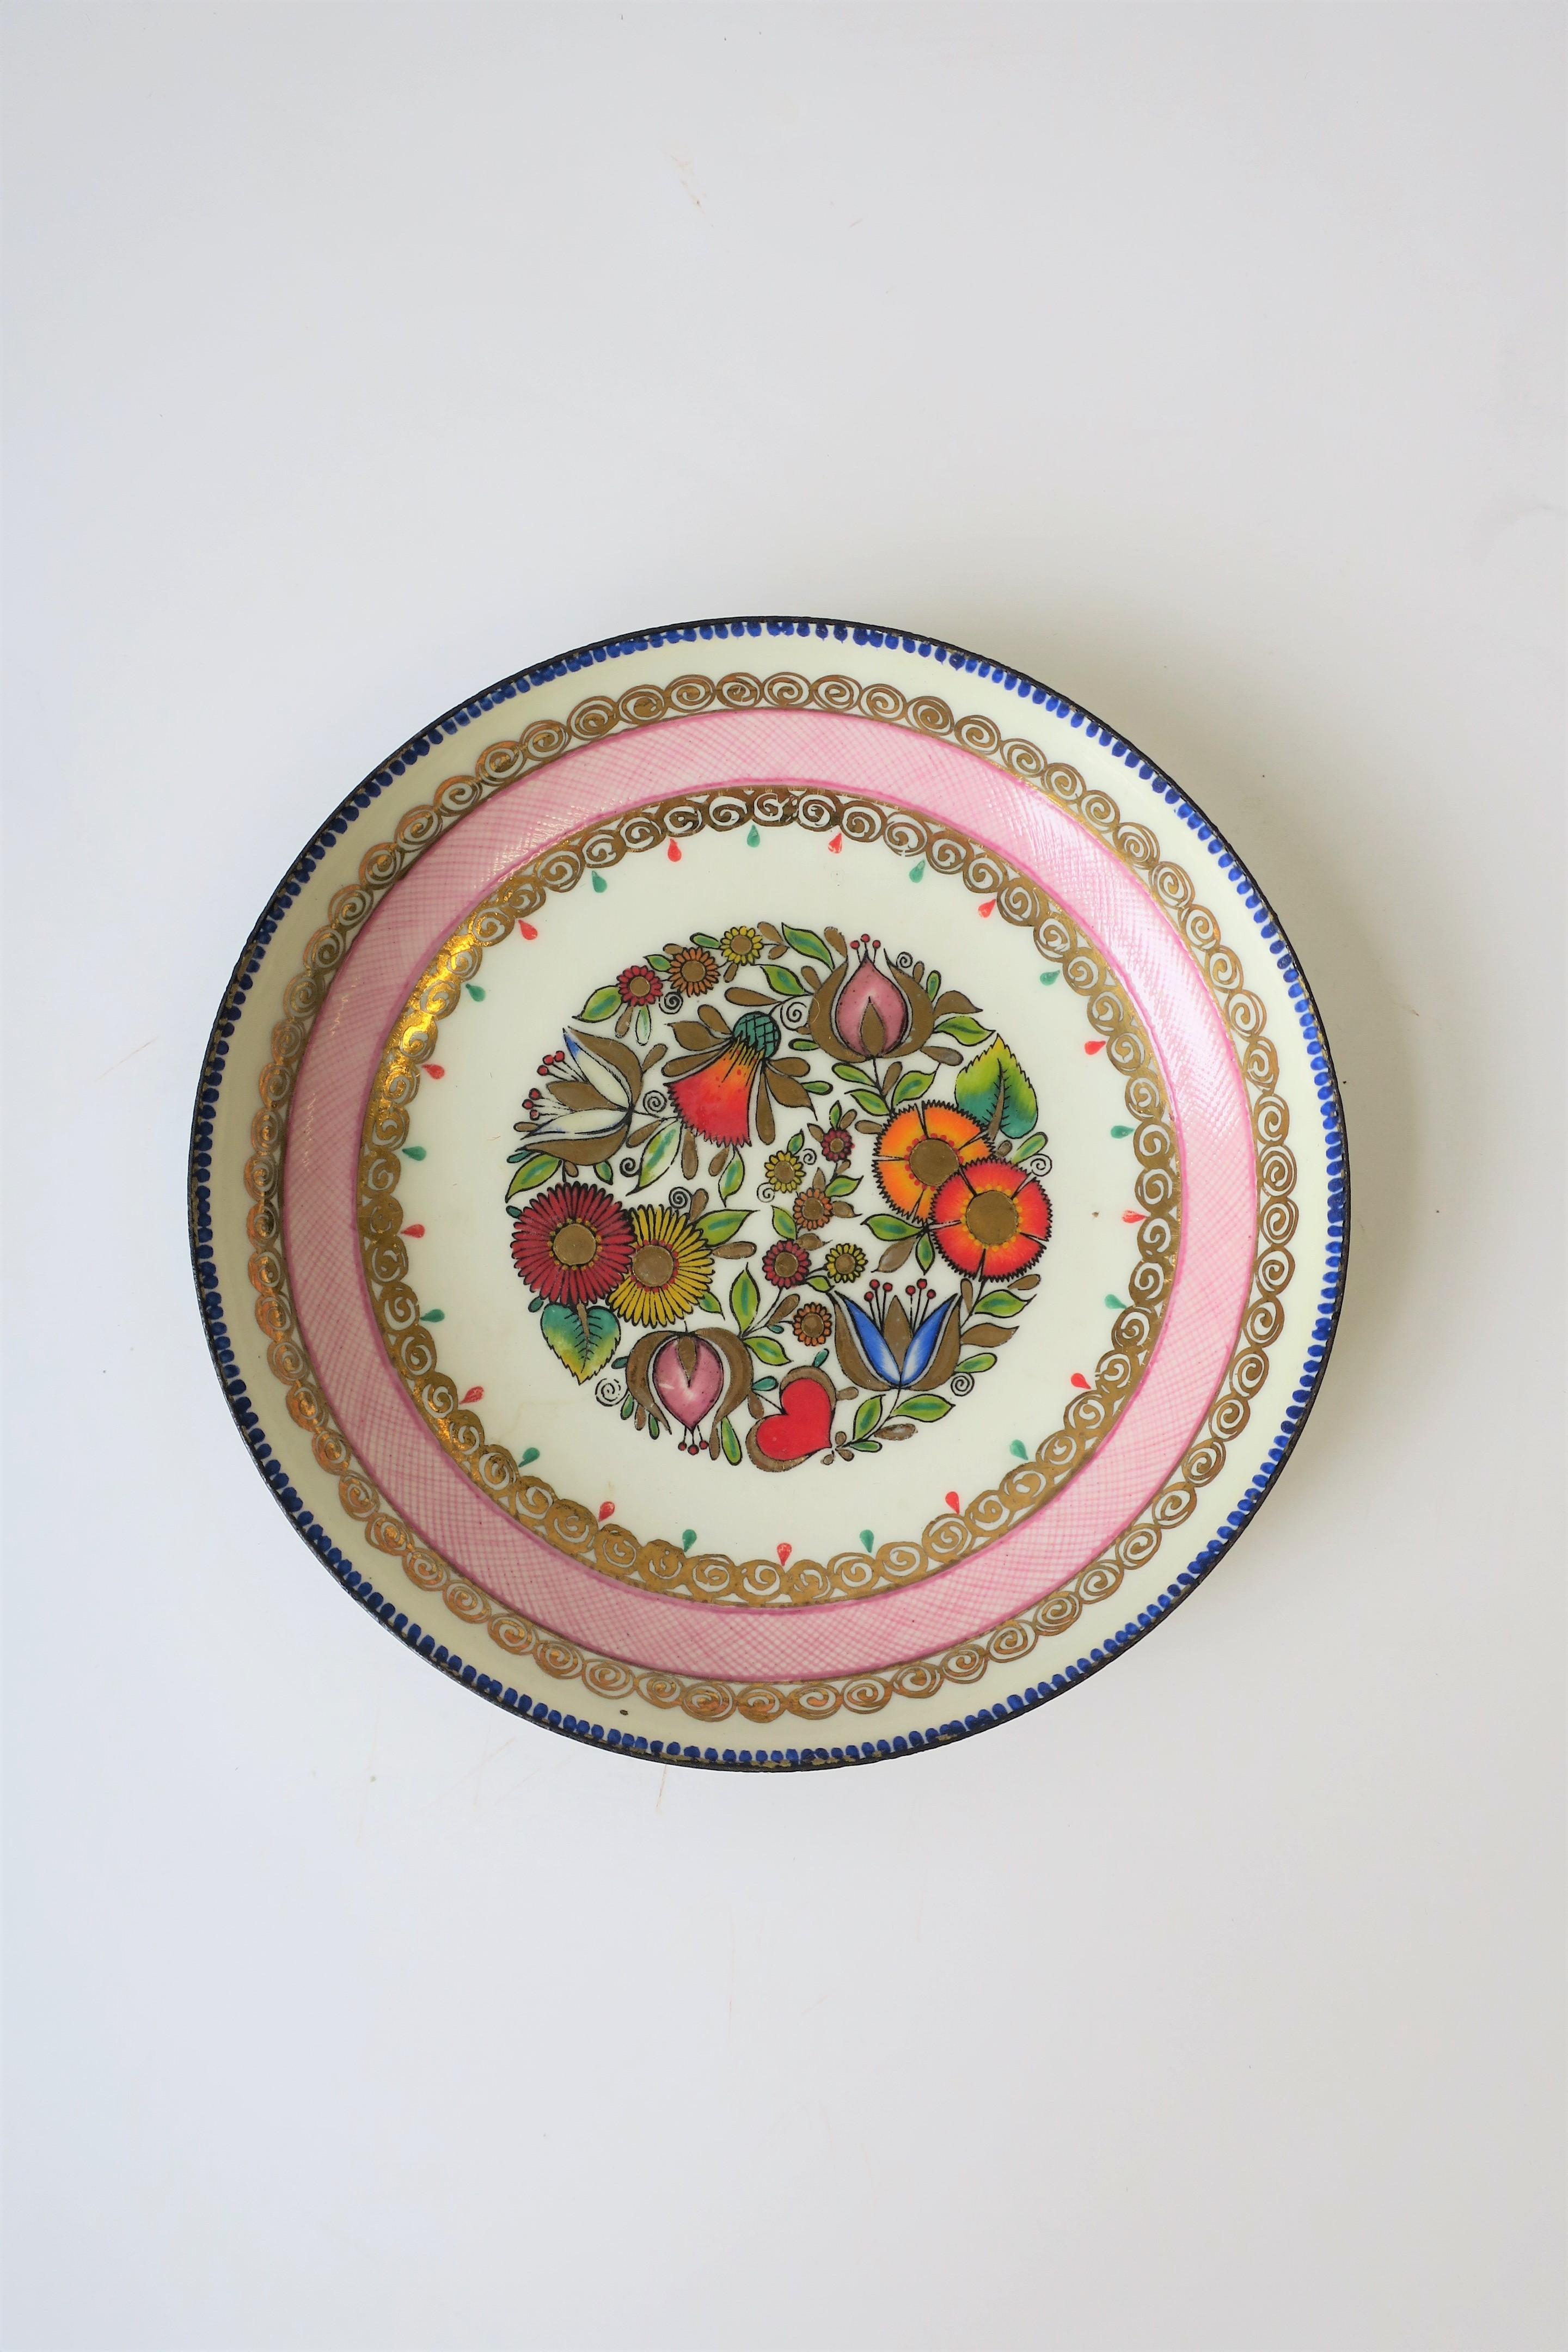 A colorful porcelain enamel Austrian bowl, jewelry dish or vide-poche (catch-all), circa mid-20th century, Austria. Dish has detailed enamel design of flowers, leaves, and swirls. Marked 